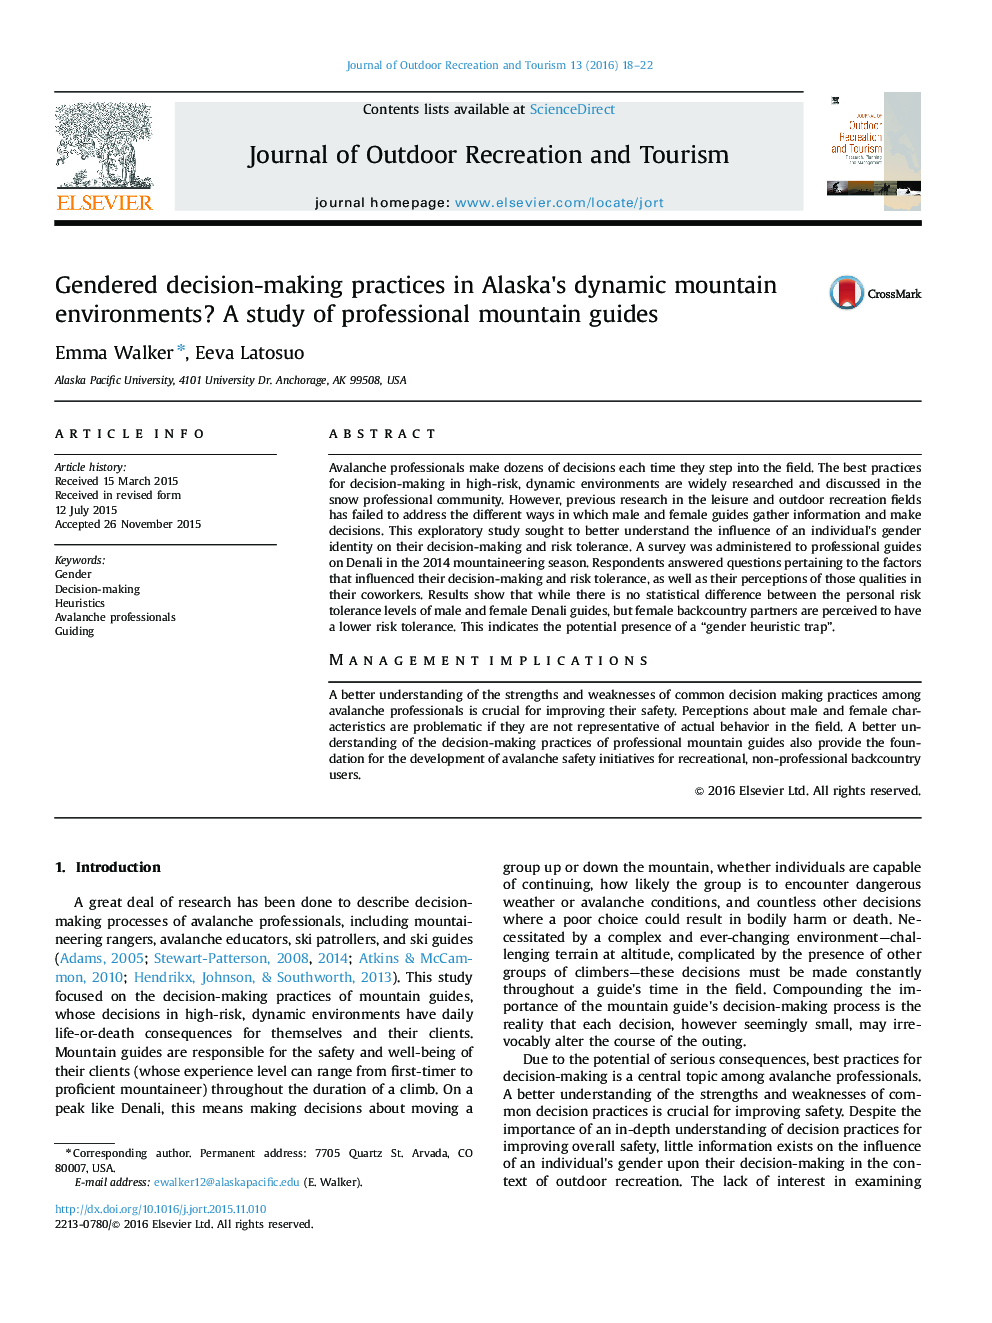 Gendered decision-making practices in Alaska's dynamic mountain environments? A study of professional mountain guides